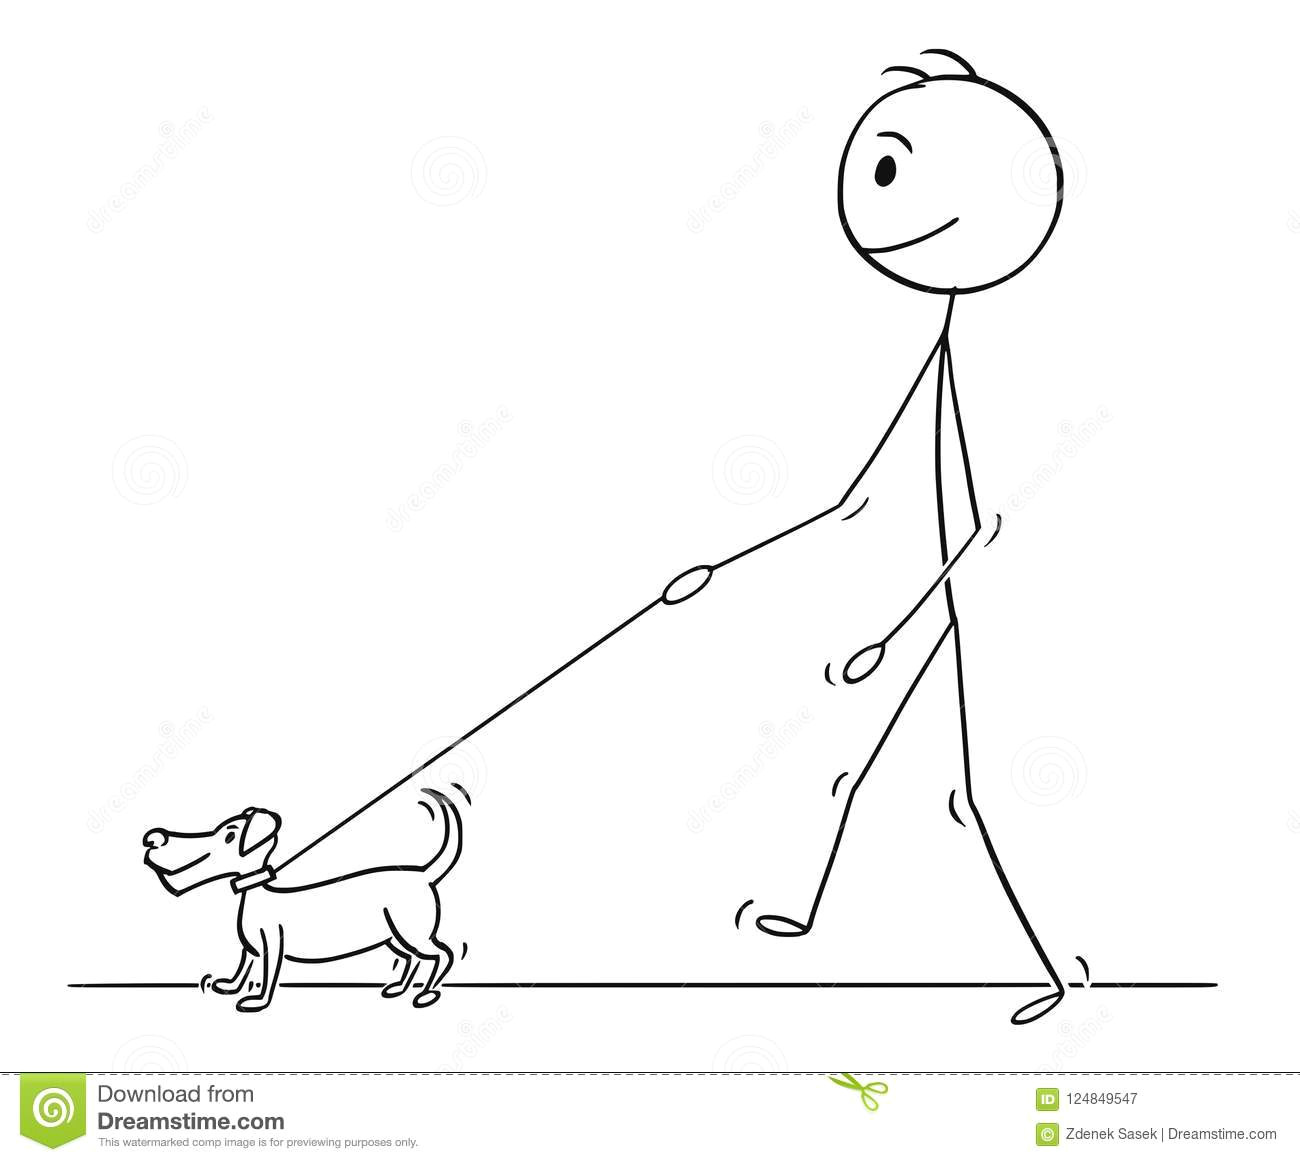 Drawing Of A Person Walking A Dog Cartoon Of Man Walking with Small Dog Stock Vector Illustration Of